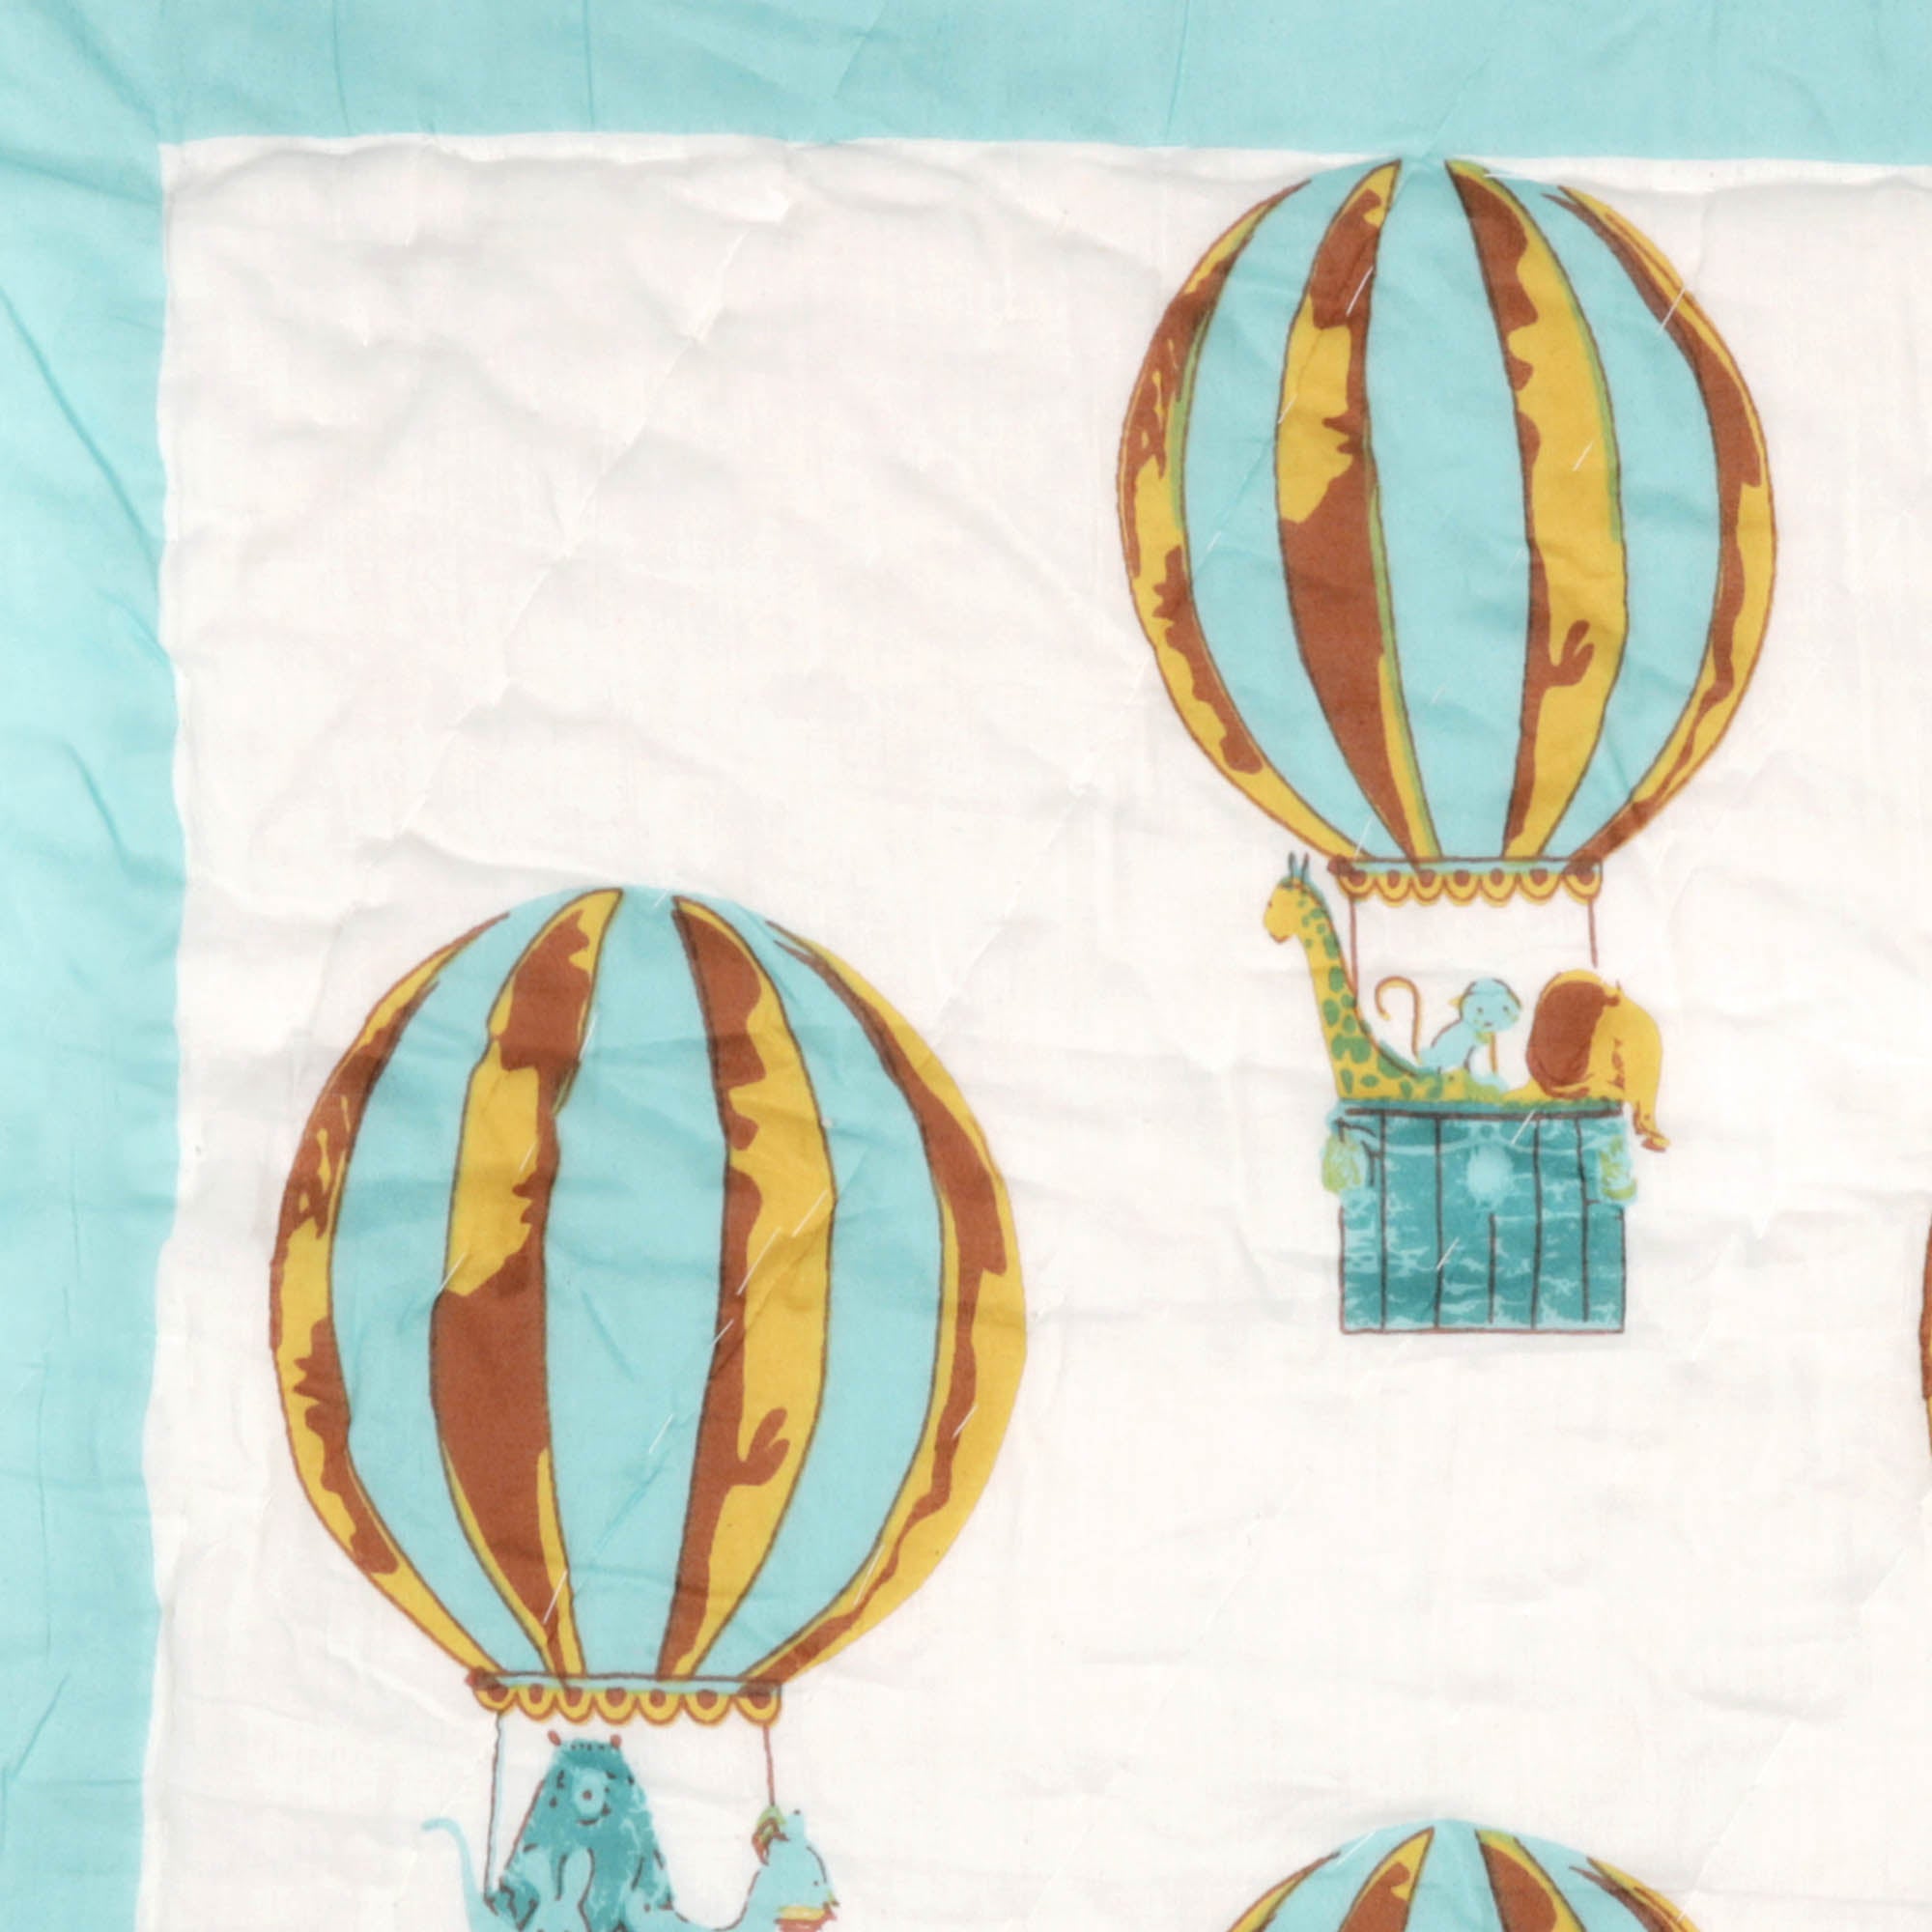 Kicks & Crawl - Fly High Quilted Thick Blanket